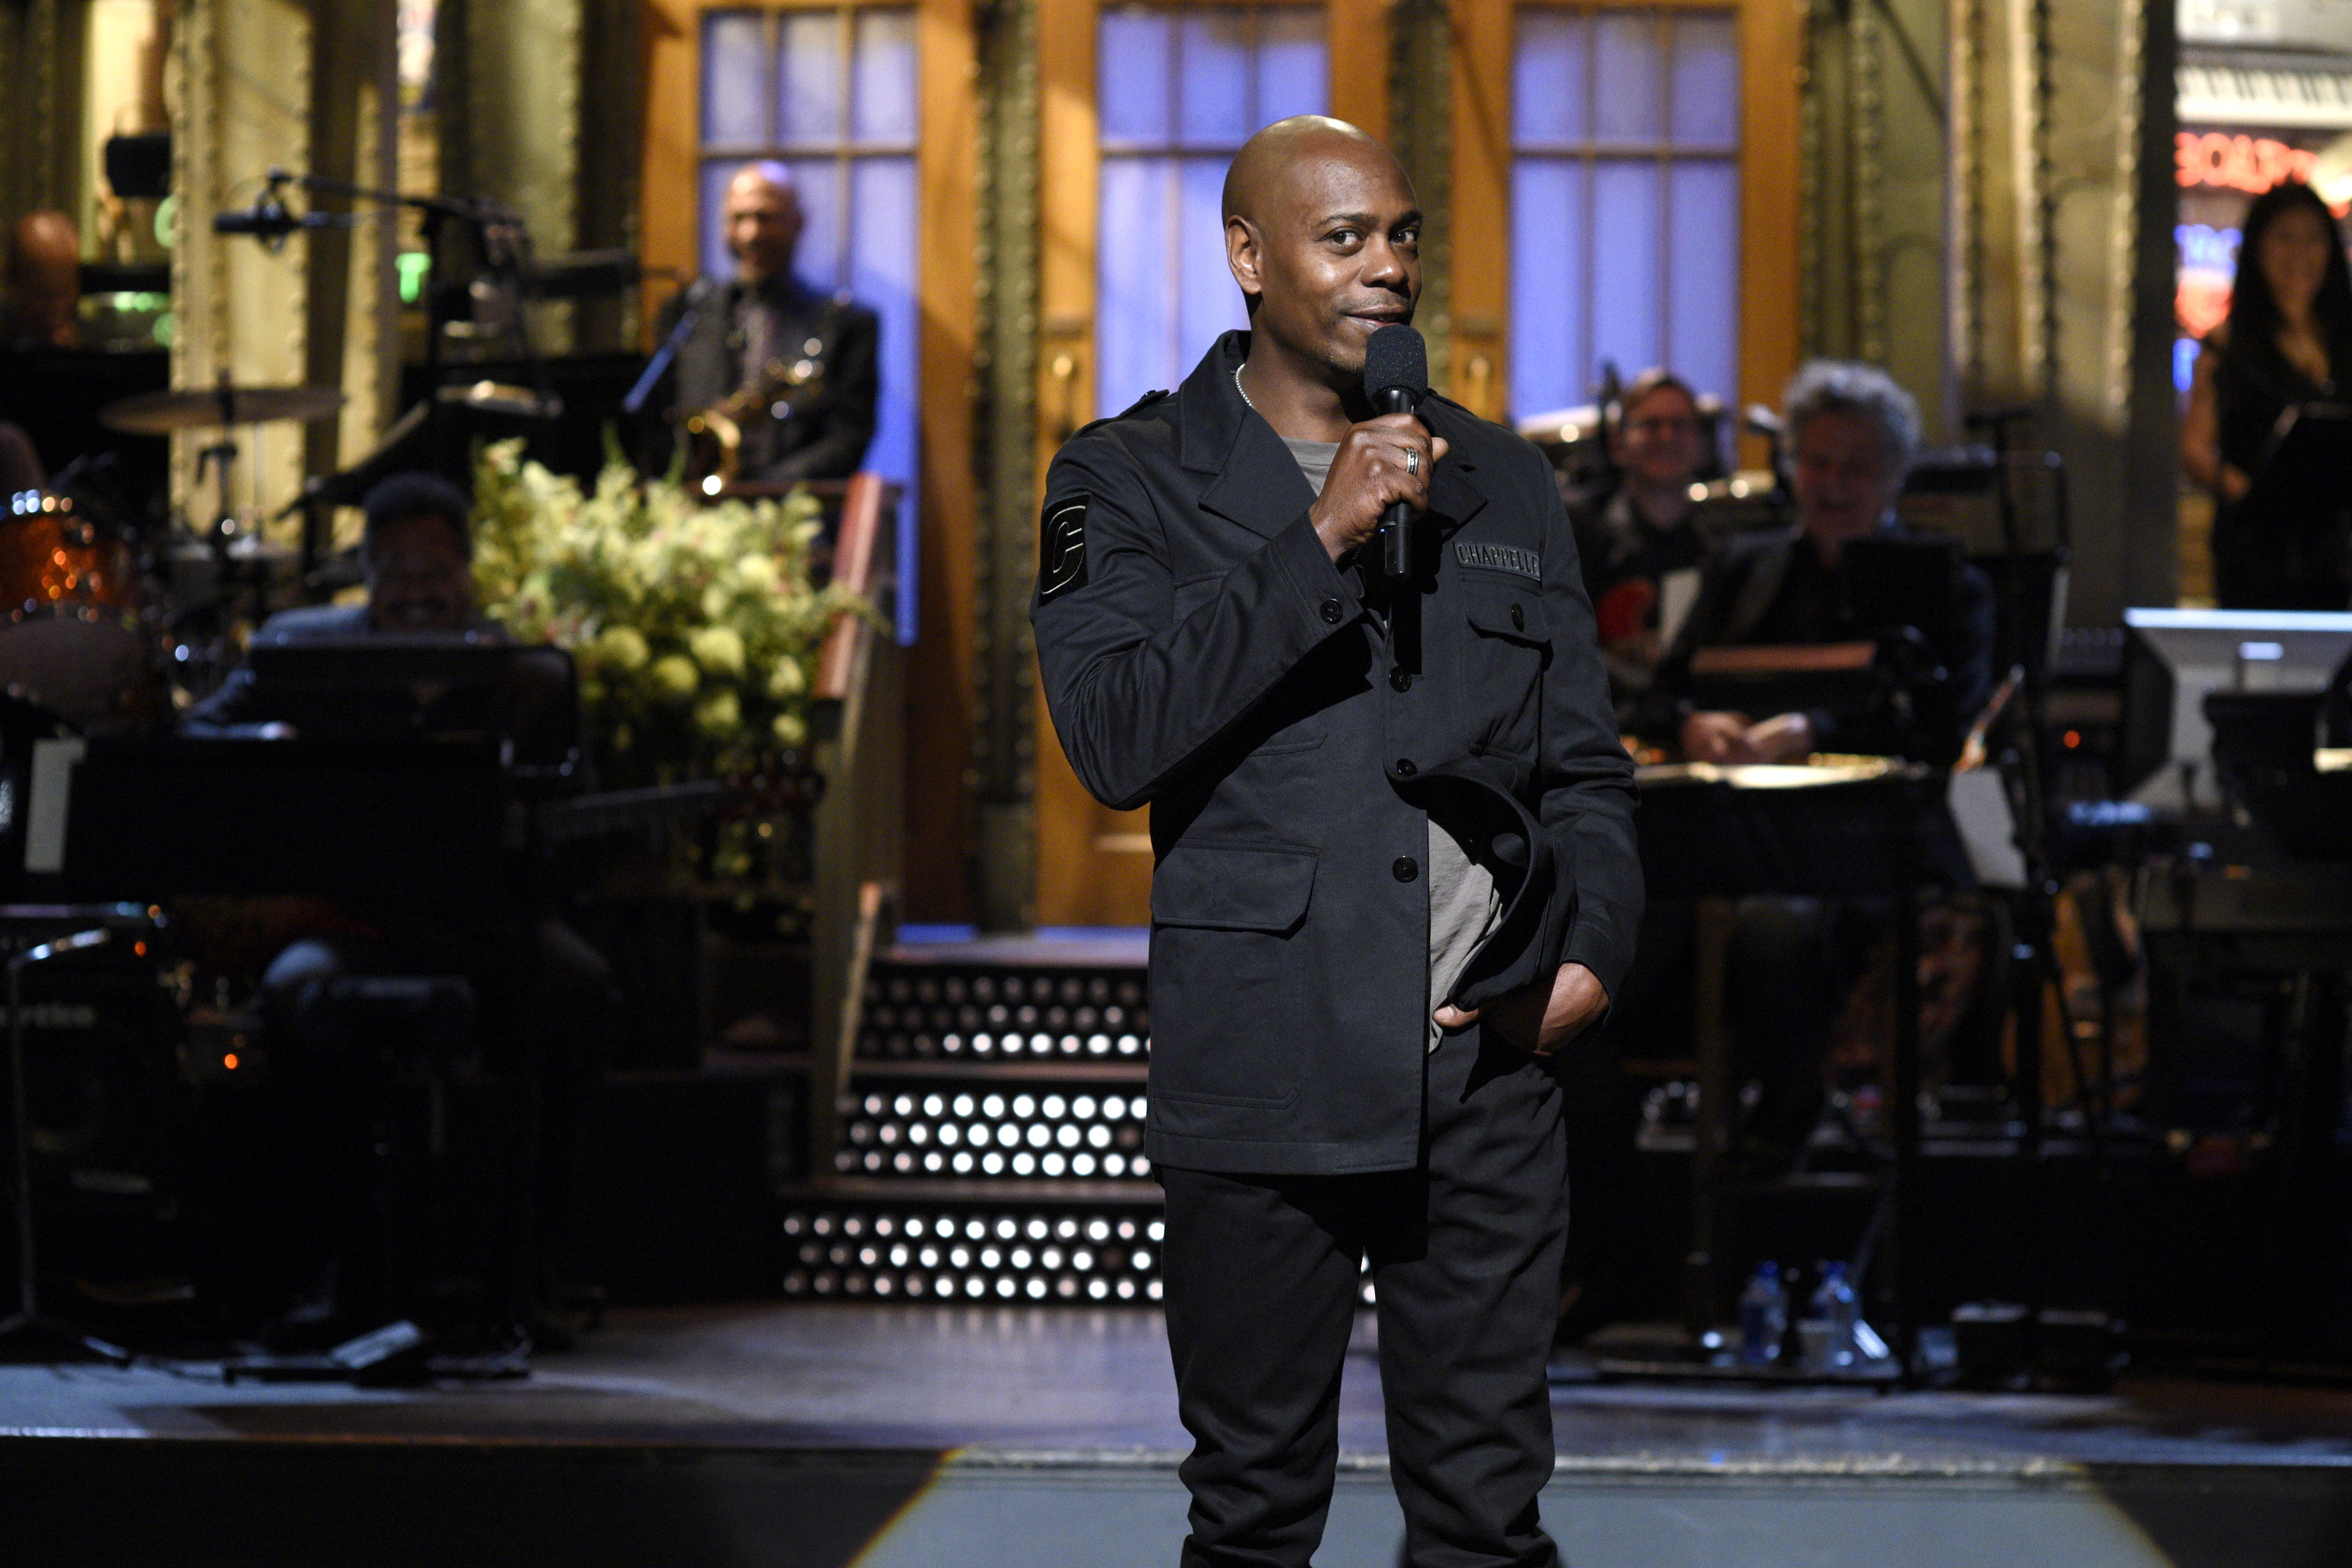 Saturday Night Live Host Dave Chappelle during the monologue on November 12, 2016. (NBC—NBCU Photo Bank via Getty Images)